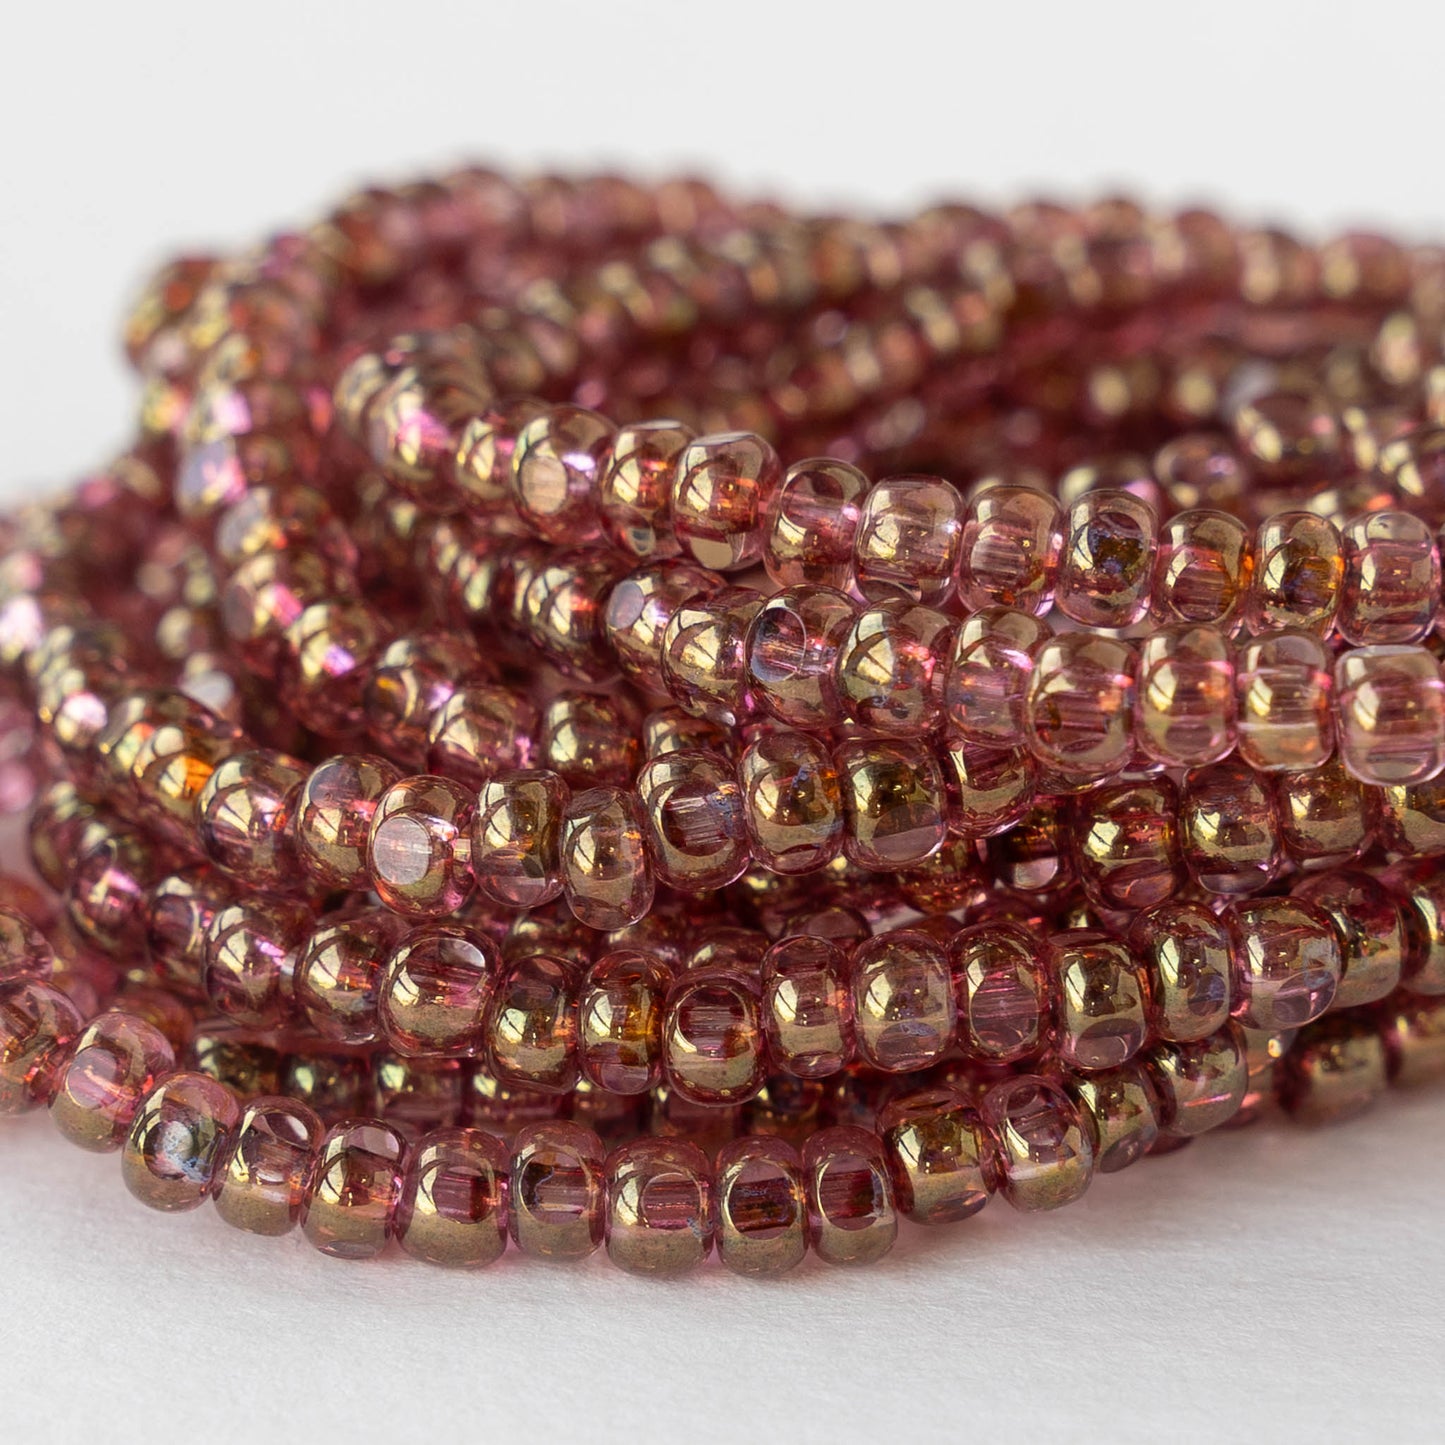 6/0 Tri-cut Seed Beads - Pink Rose with Gold Shimmer - 50